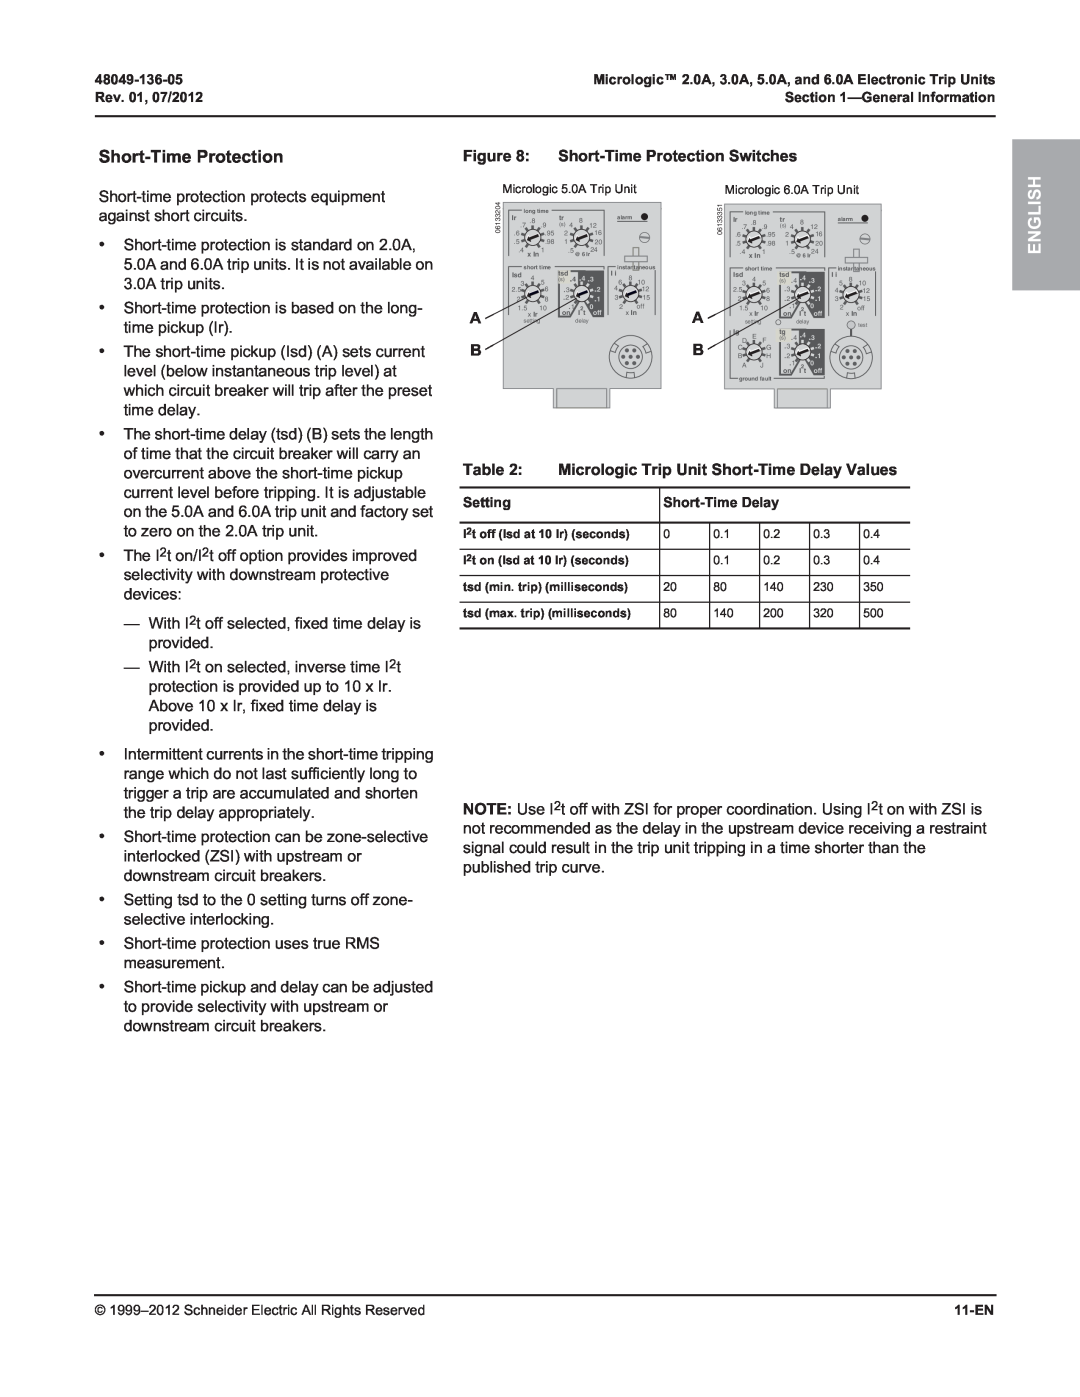 Schneider Electric 2.0A, 3.0A Short-Time Protection Switches, Micrologic Trip Unit Short-Time Delay Values, English 